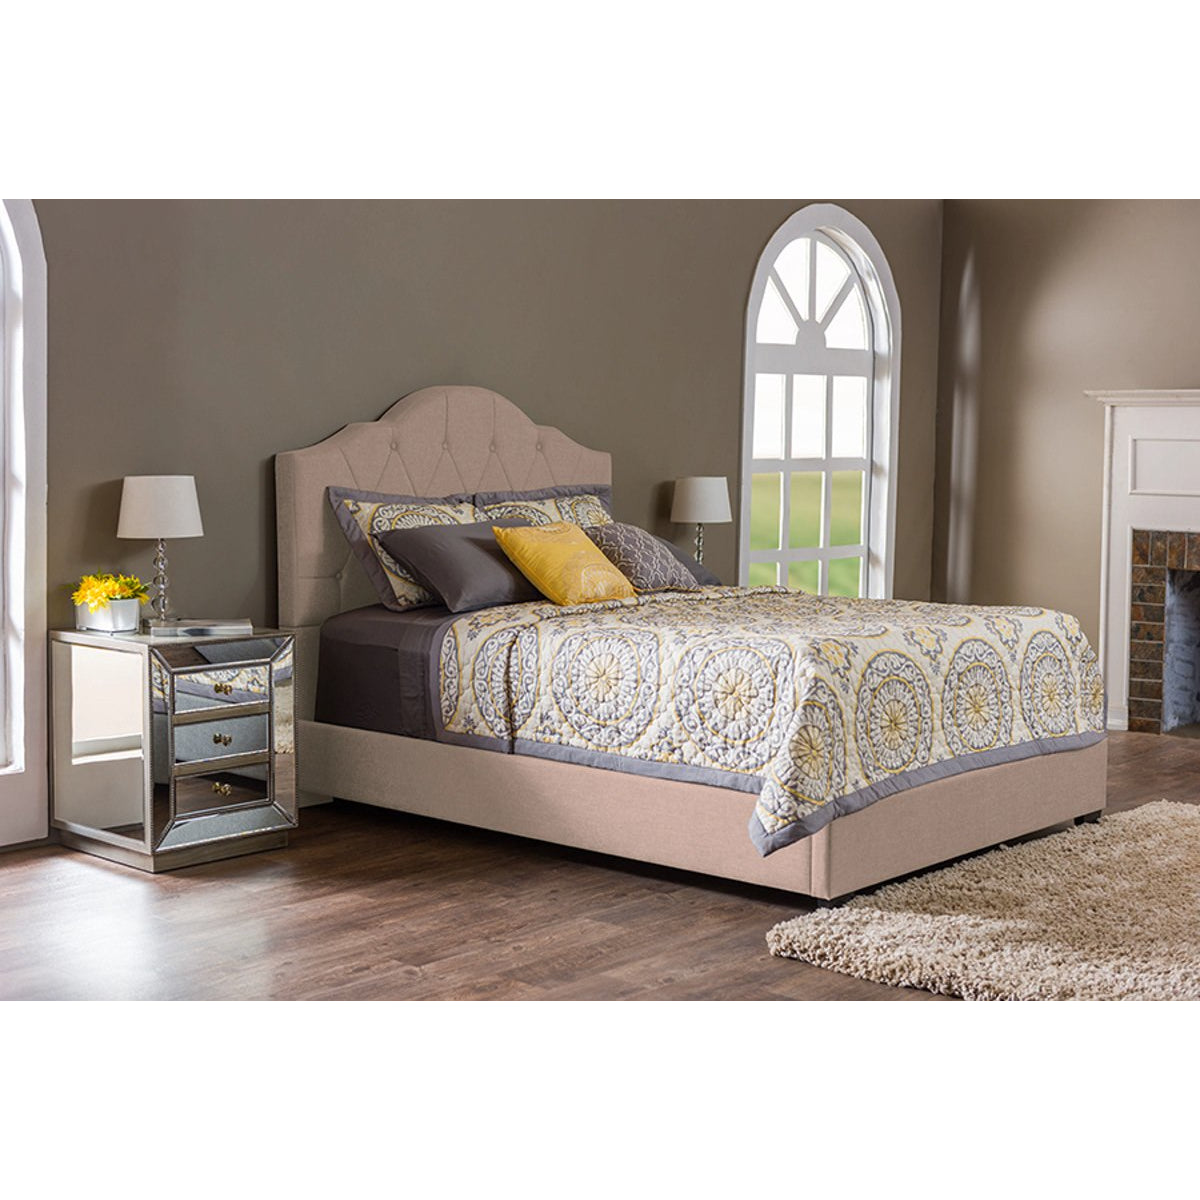 Baxton Studio Juliet Contemporary Light Brown Tufted Fabric Upholstered King Size Bed Baxton Studio-beds-Minimal And Modern - 4